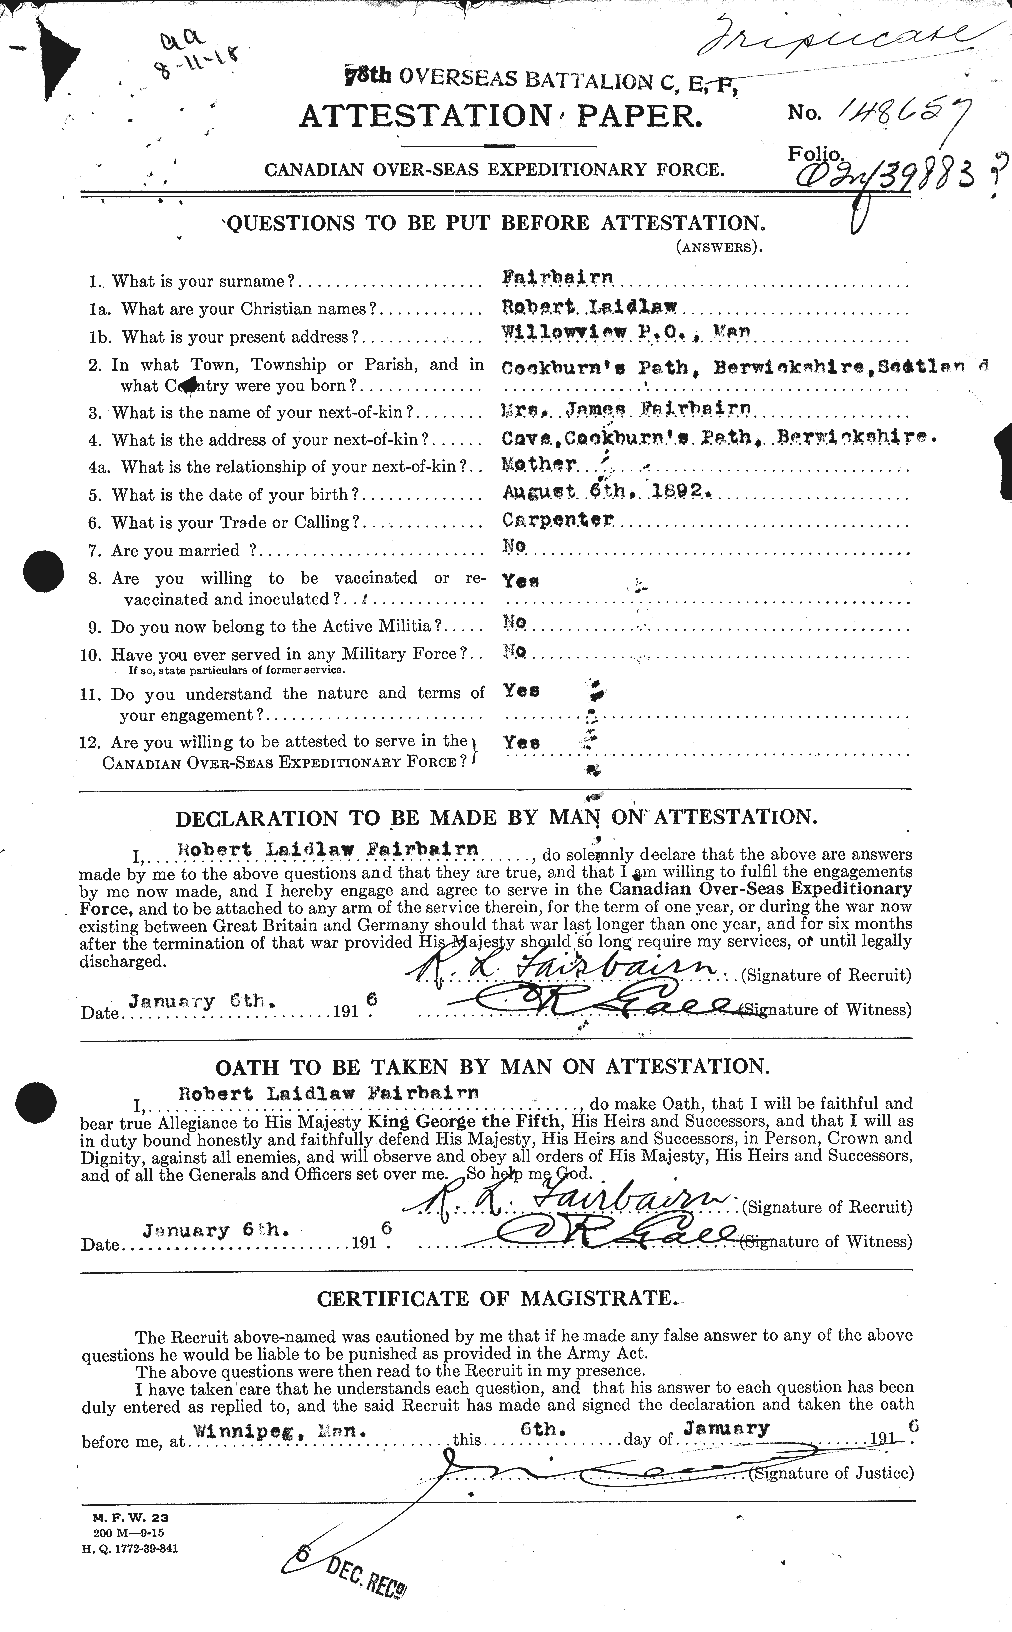 Personnel Records of the First World War - CEF 320863a